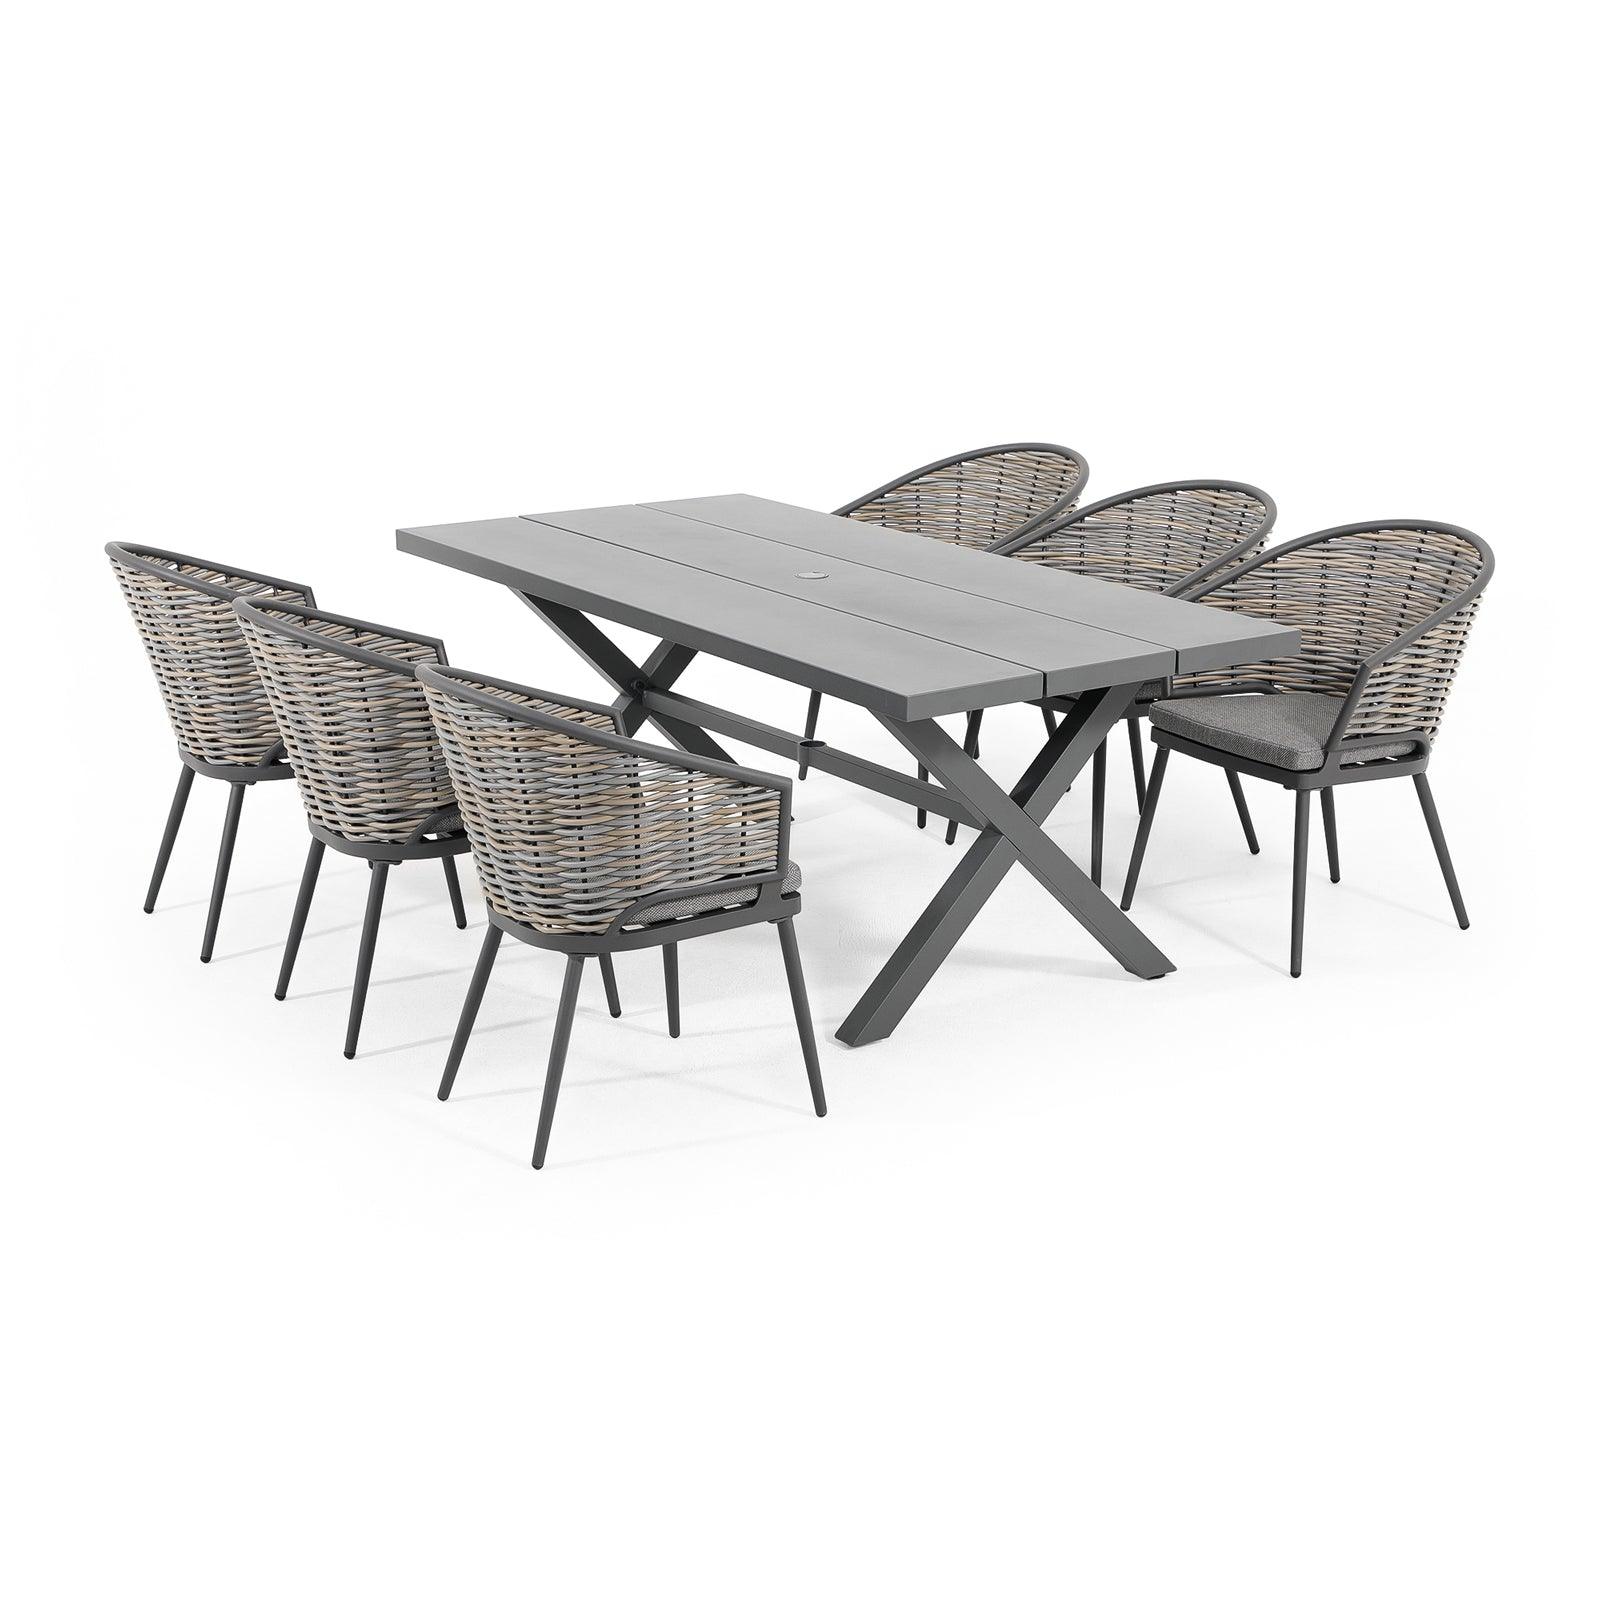 Burano Grey 6-person Outdoor Dining Set with aluminum frame, 6 dining chairs with grey cushions, 1 aluminum X-Shaped rectangle dining Table, white background - Jardina Furniture #Pieces_7-pc.